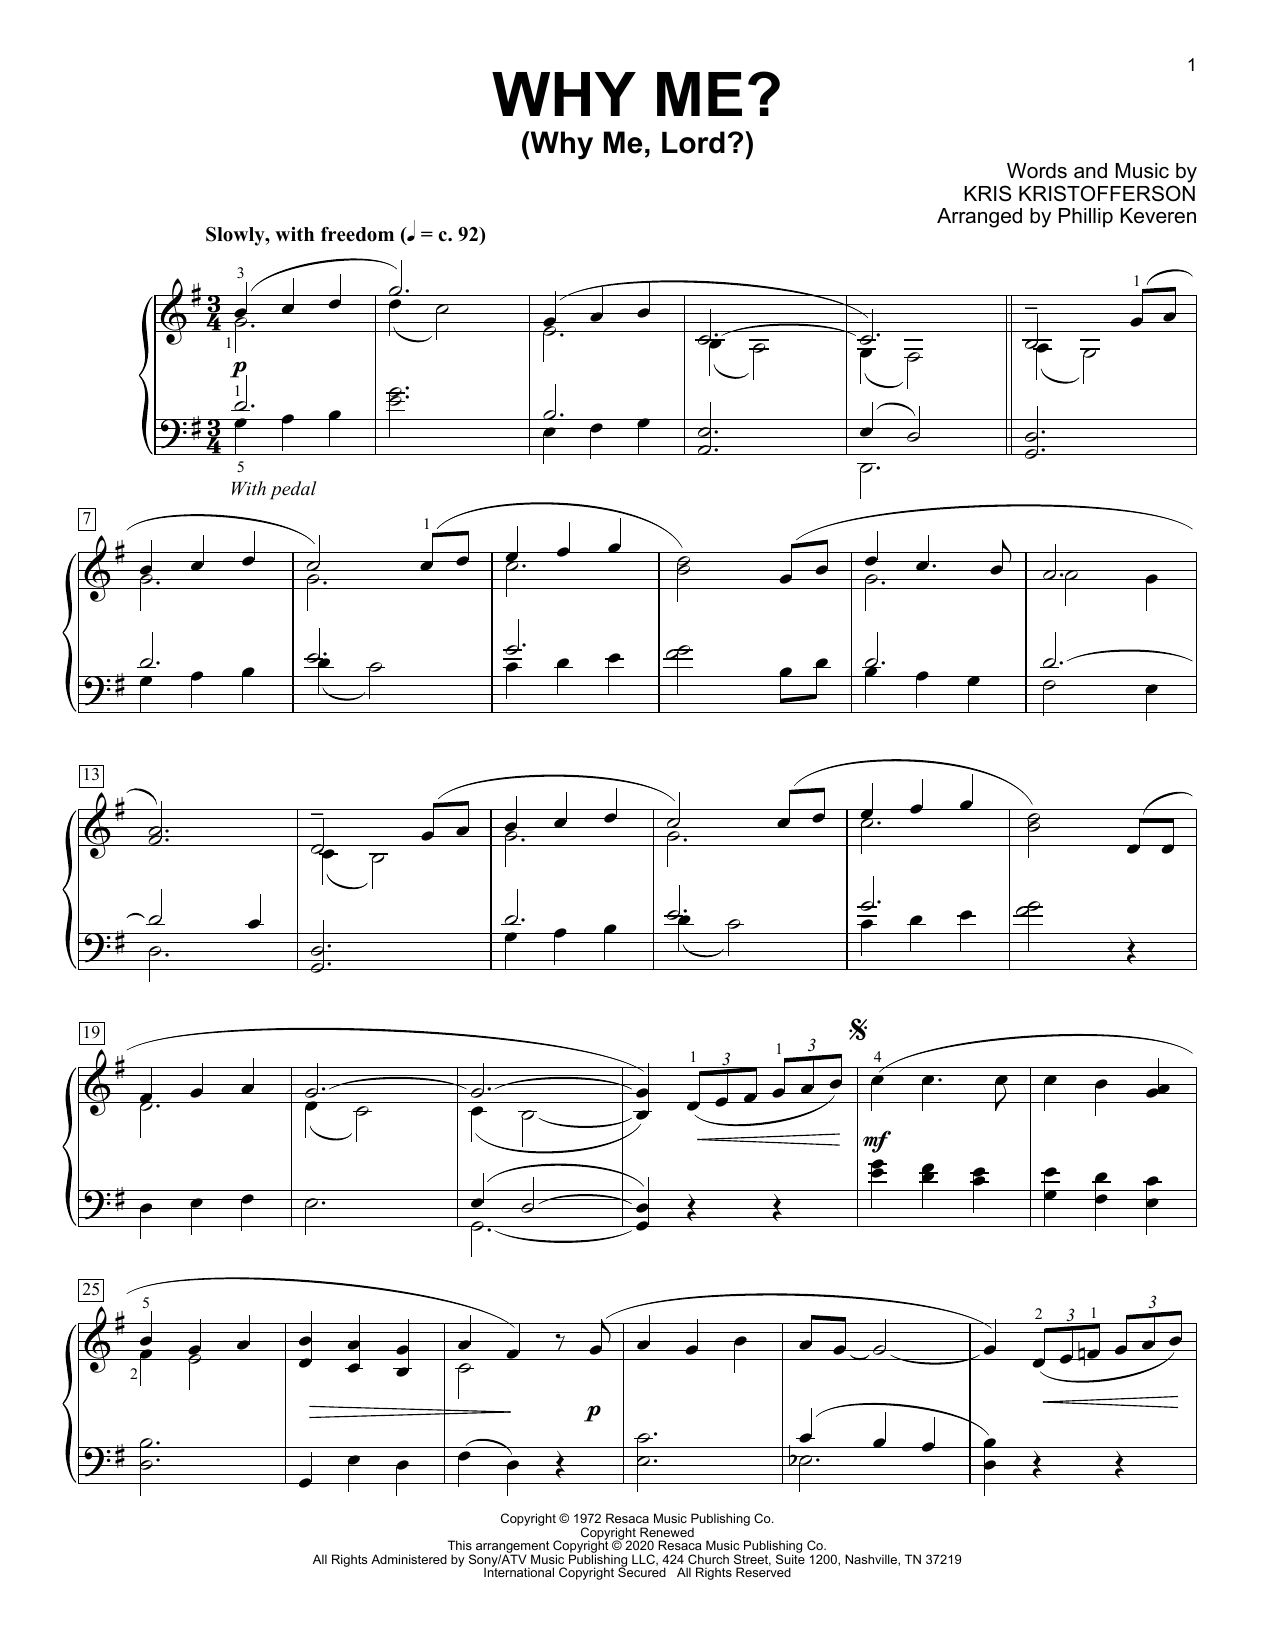 Download Kris Kristofferson Why Me? (Why Me, Lord?) [Classical vers Sheet Music